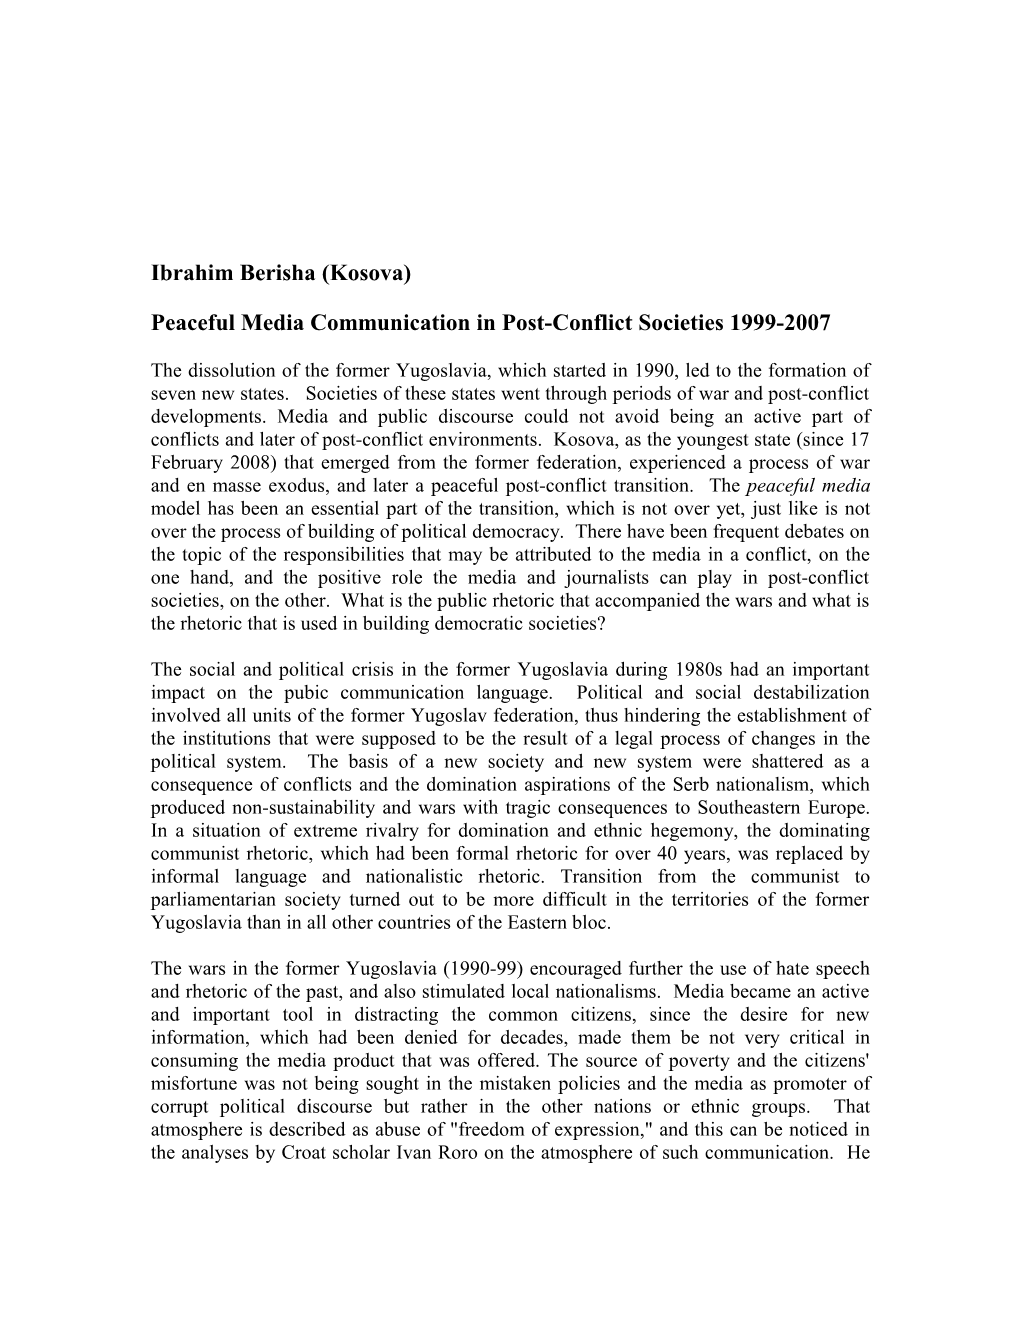 Peaceful Media Communication in Post-Conflict Societies 1999-2007